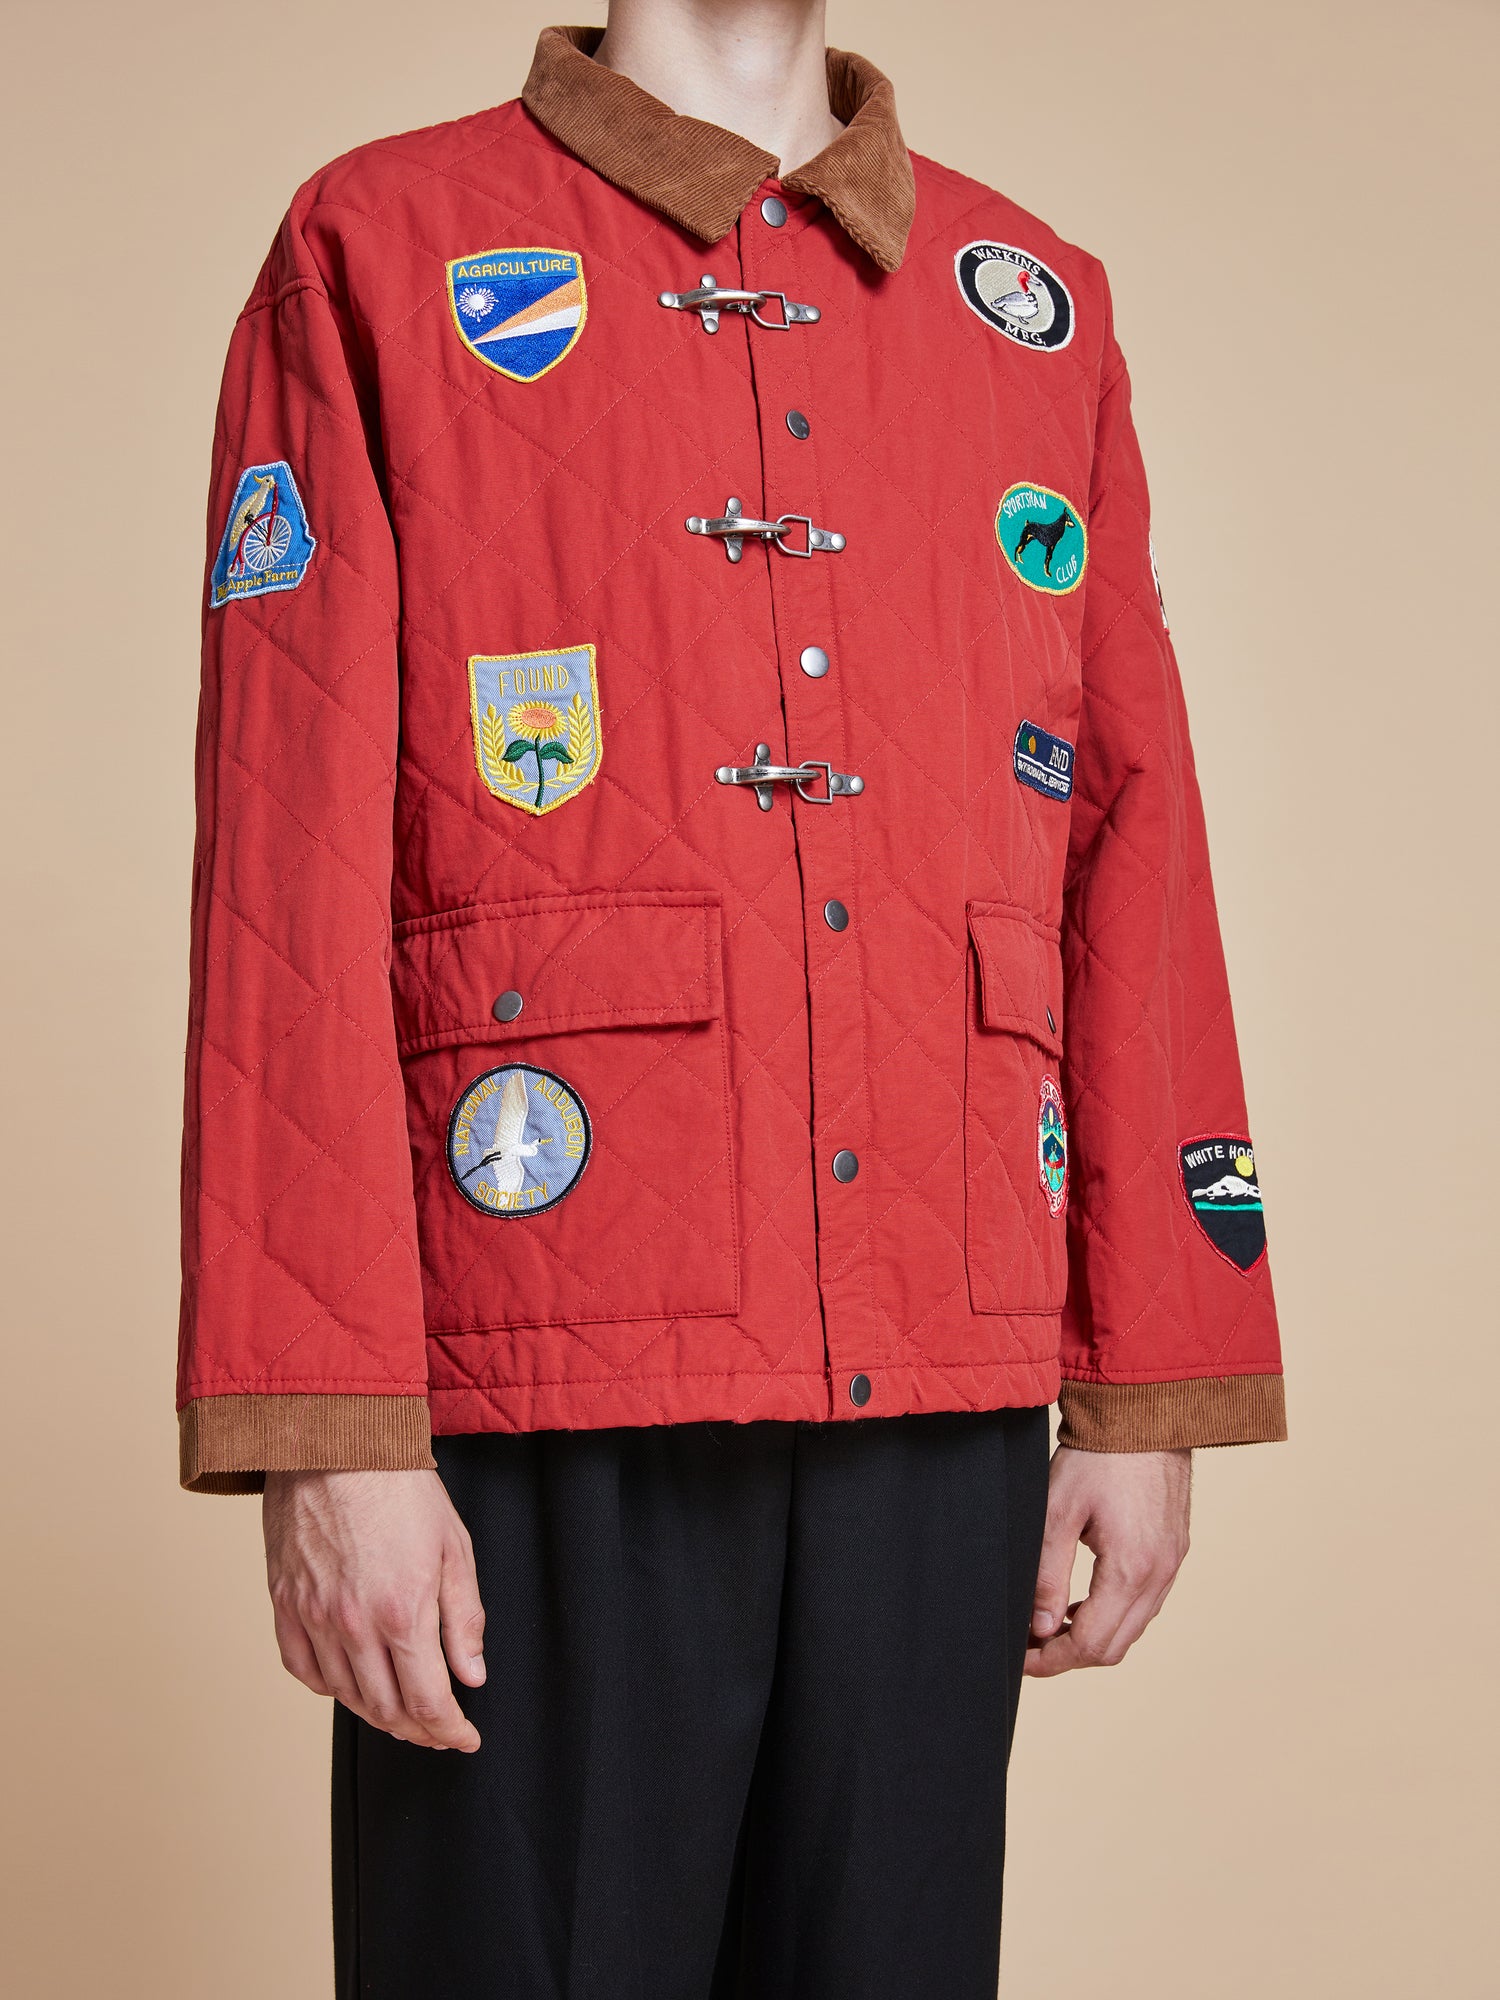 A man wearing a Found Farmstead Quilt Patch Jacket with patches.